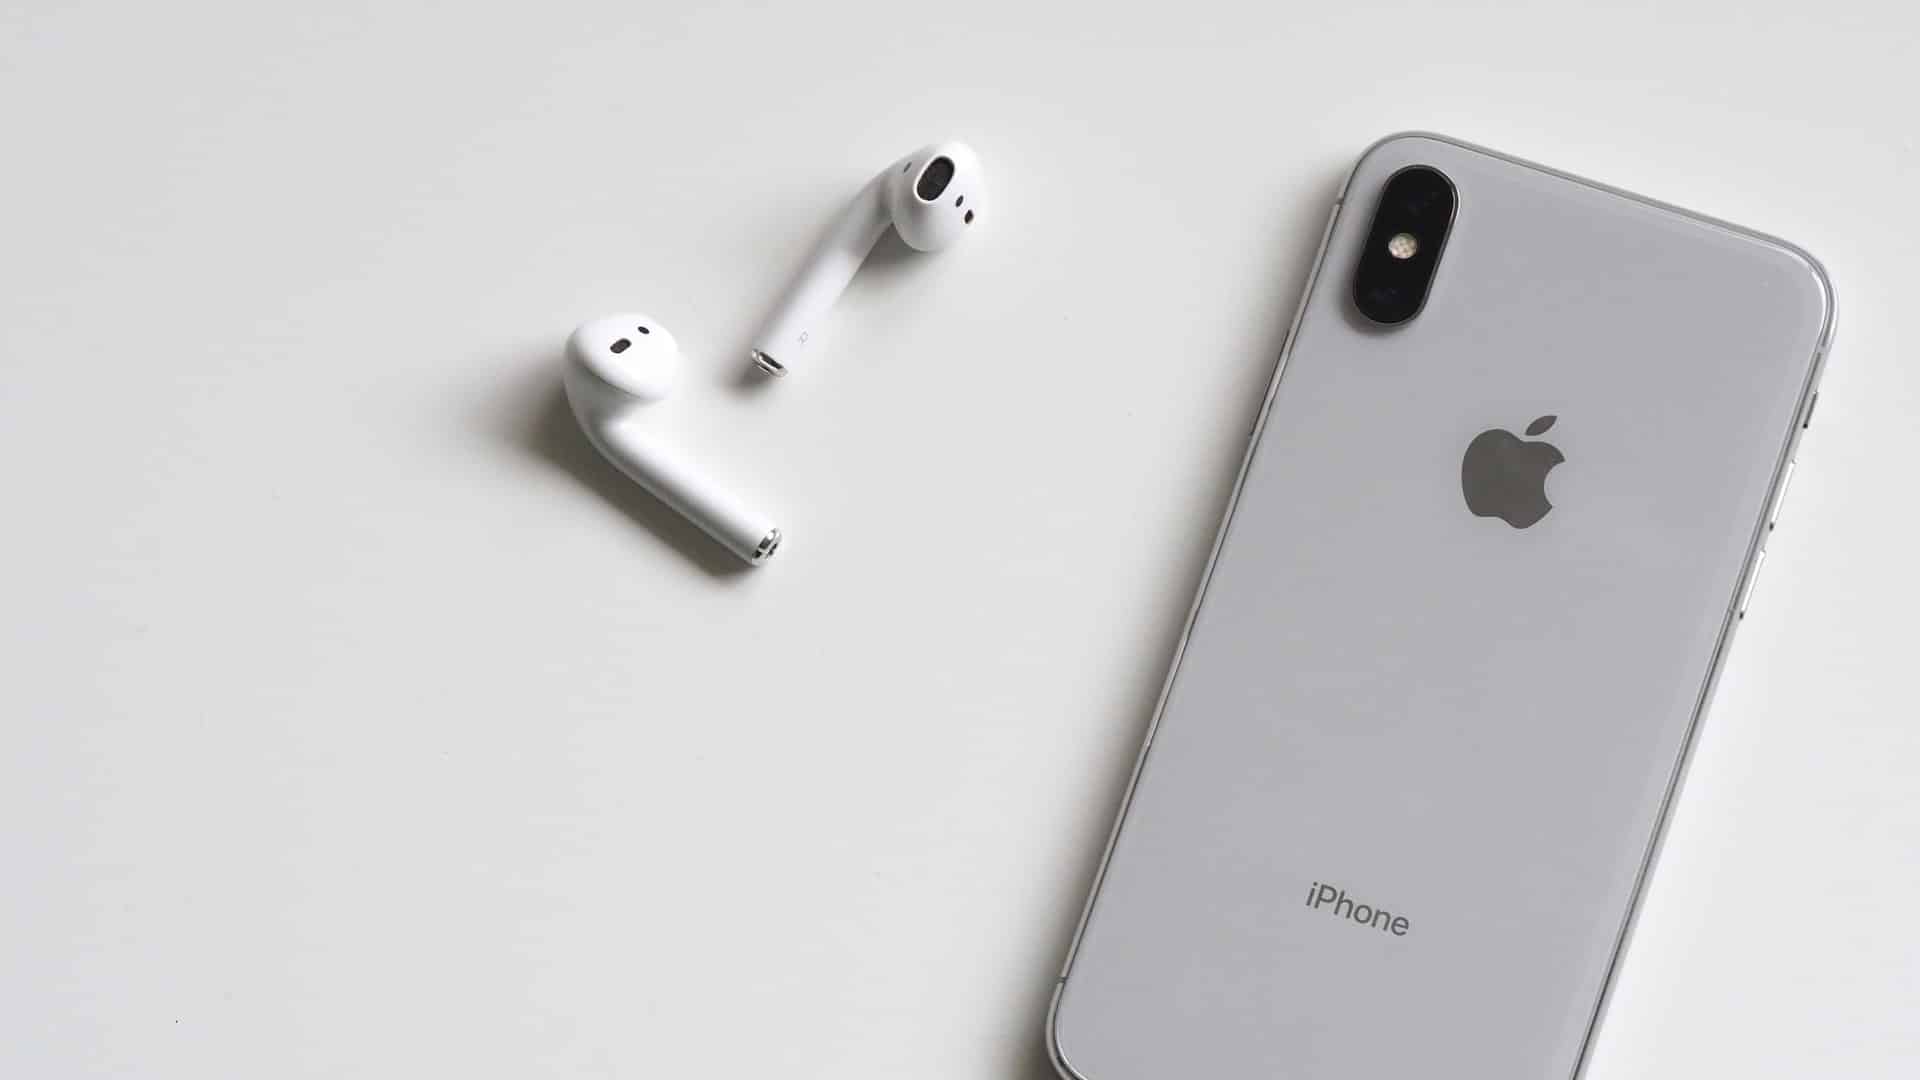 iPhone market share in China hits record high in Q4 2021